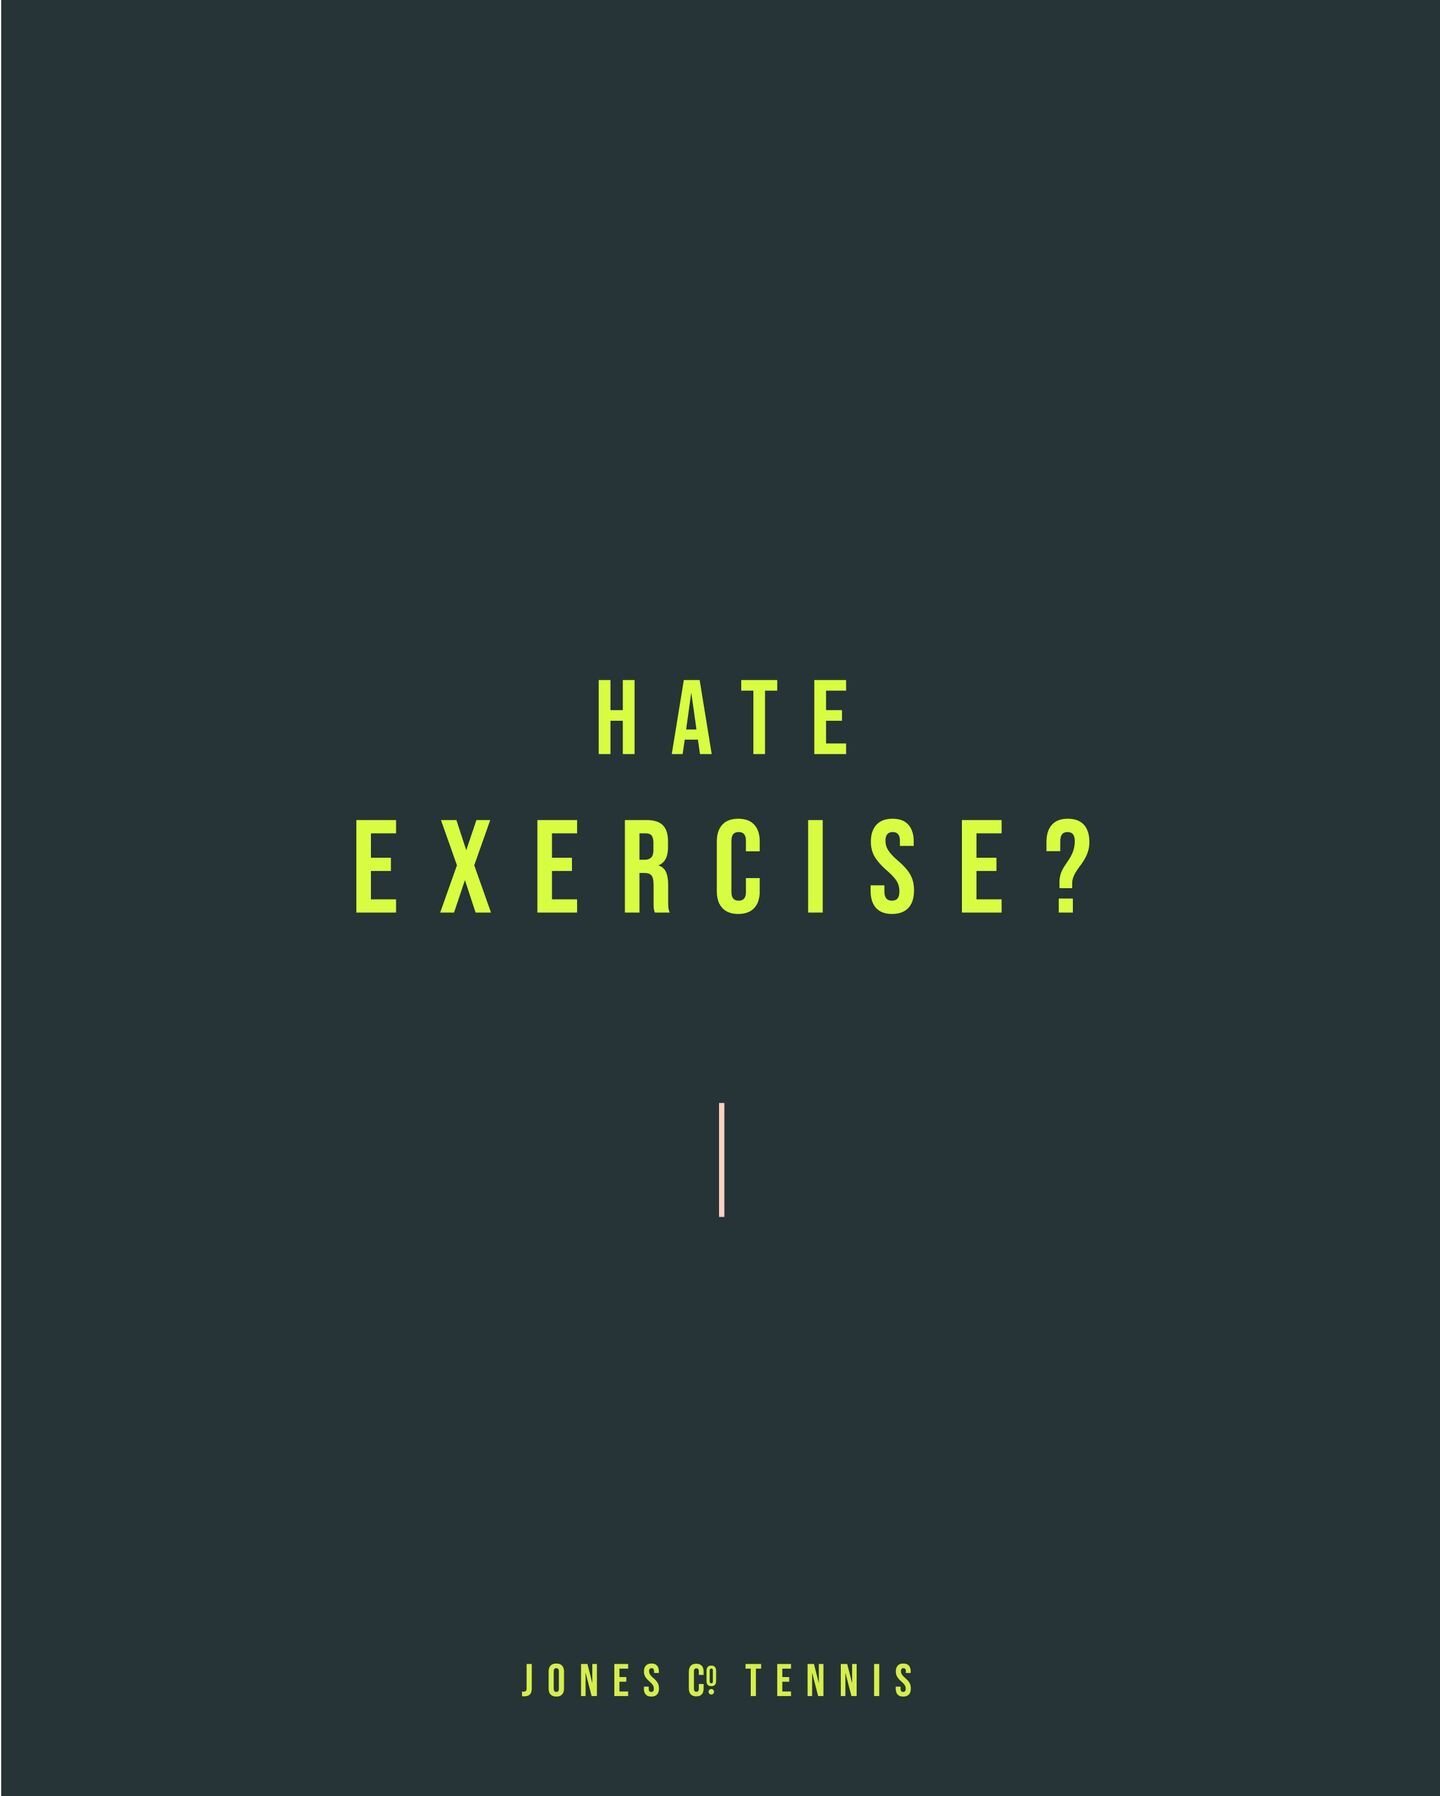 Hate exercise? 🥴

We have all been there. But finding ways to motivate yourself is key because we know how important being active is for a healthy life. 

Here are some tips if you're trying to get back into it or have hit a slump with your current 